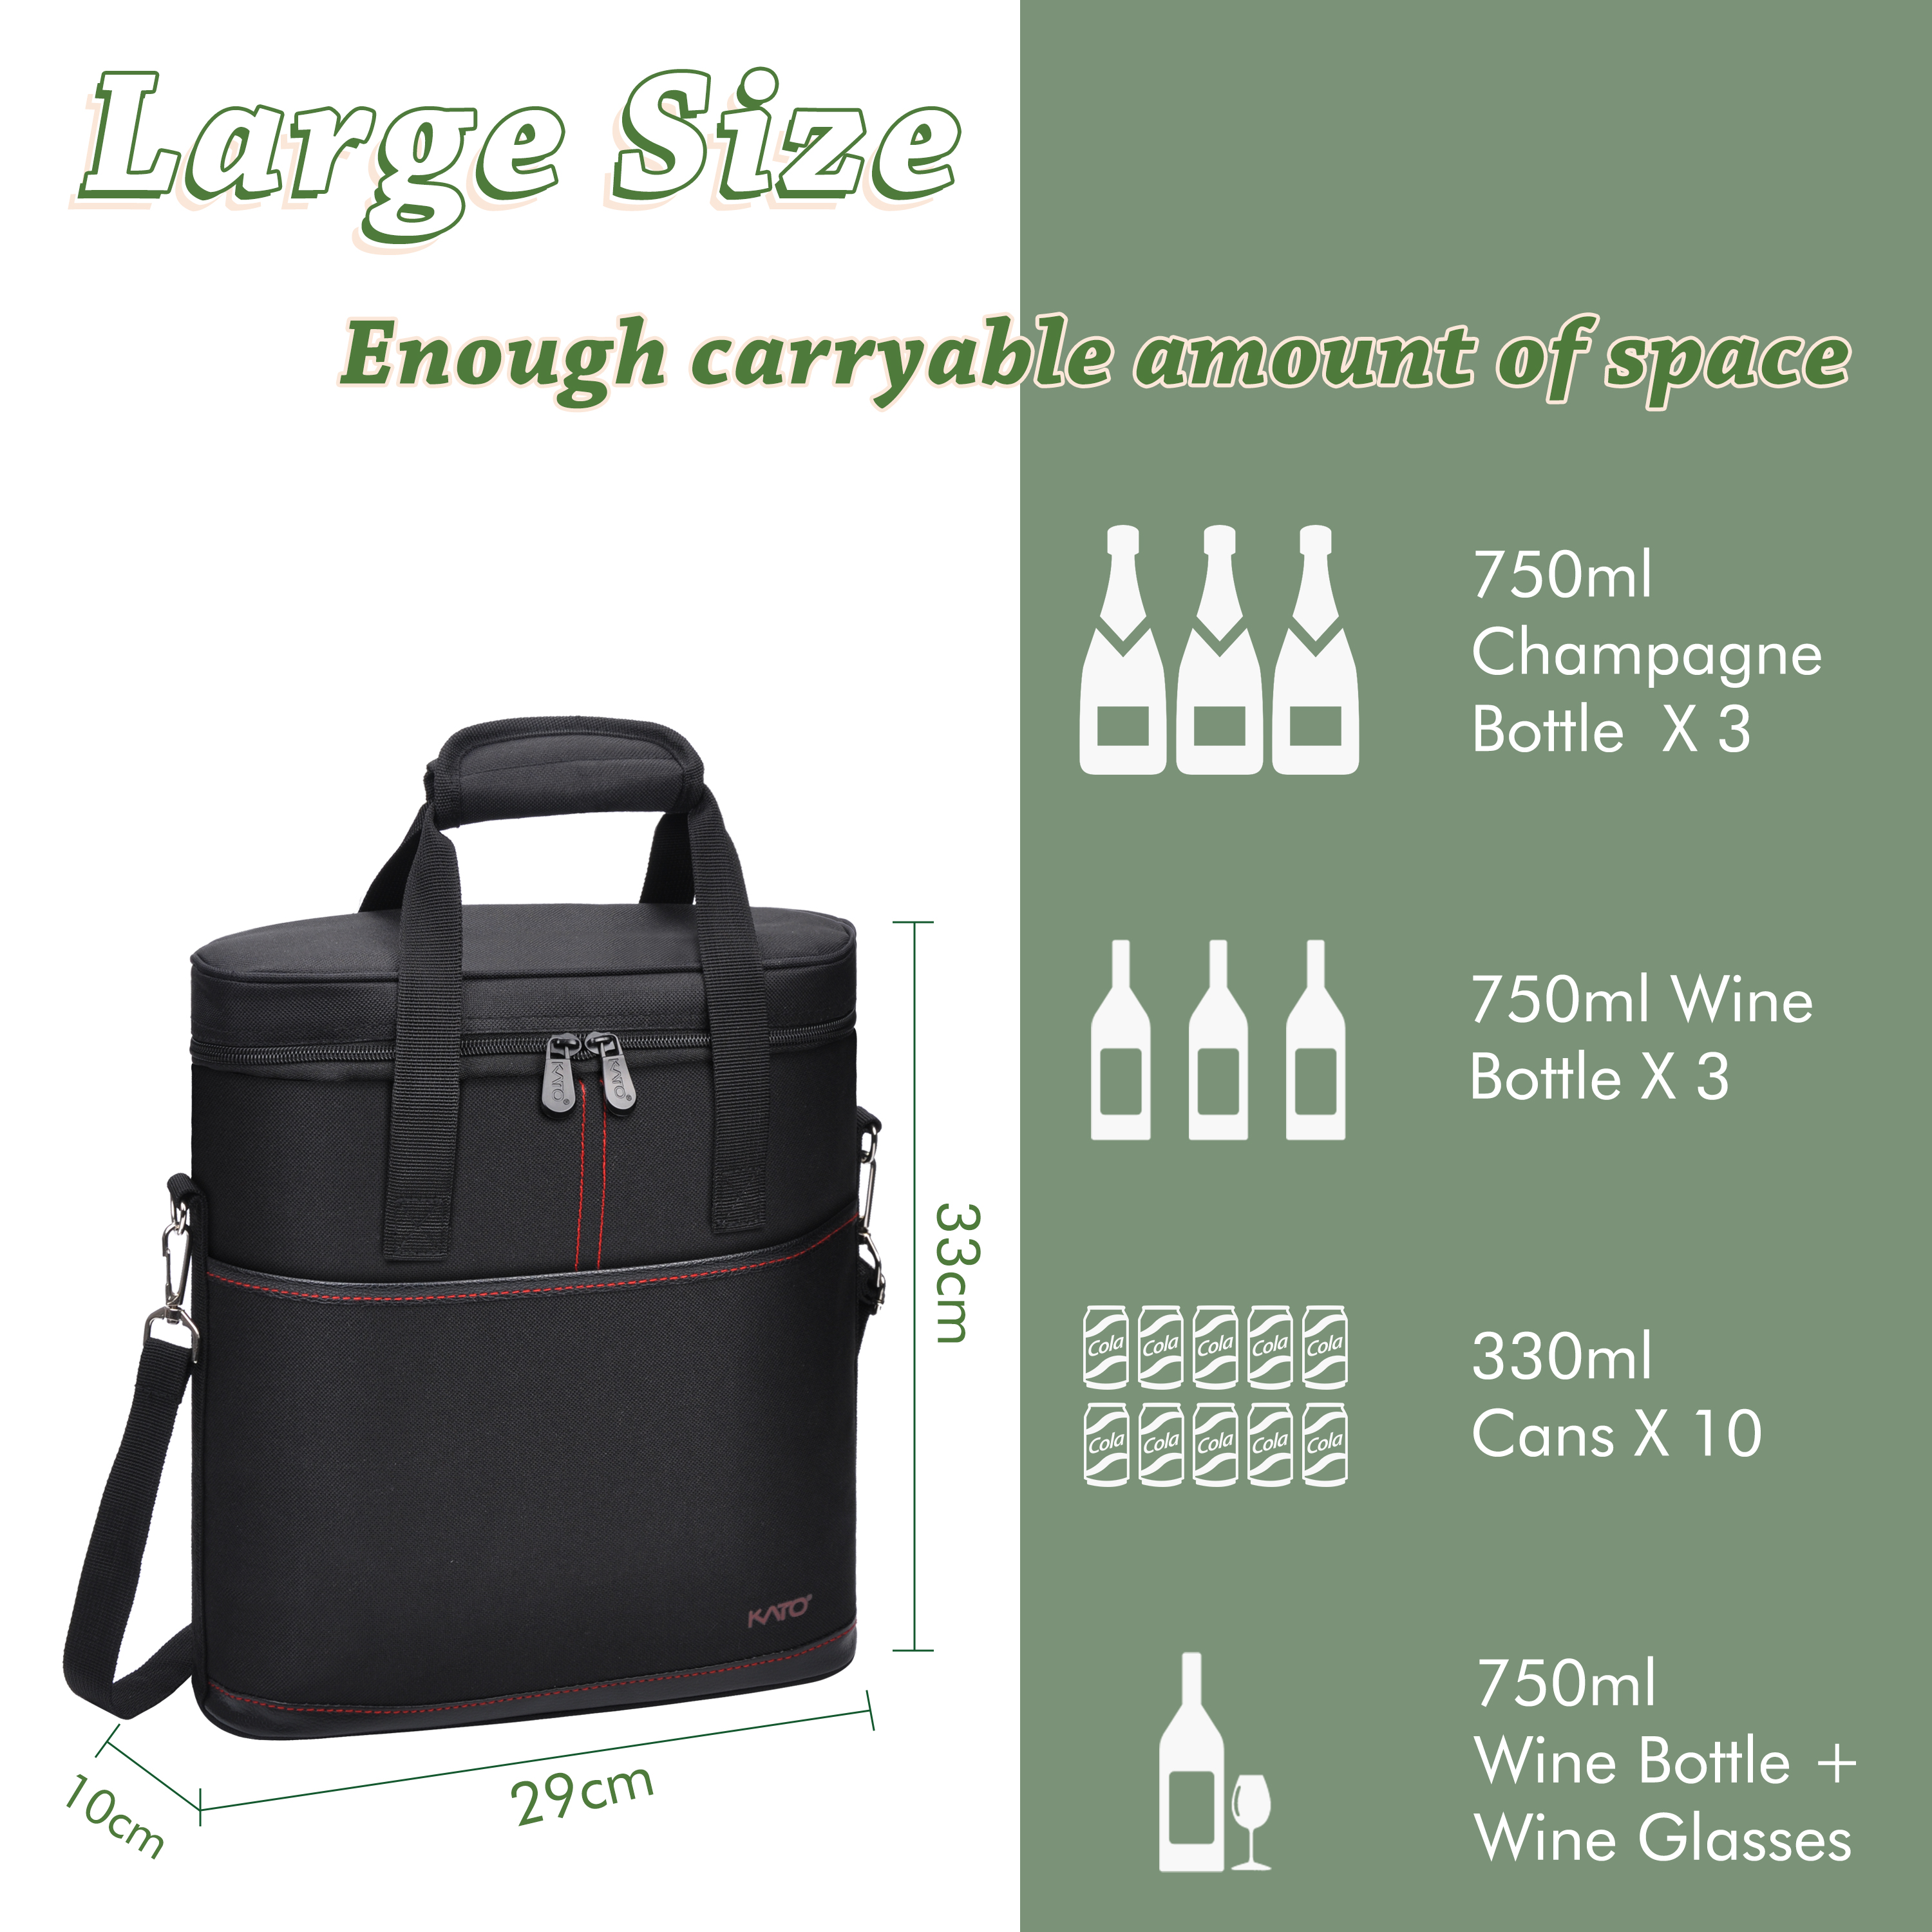 Tirrinia Insulated Wine Carrier - 3 Bottle Travel Padded Wine Carry Cooler Tote Bag with Handle and Adjustable Shoulder Strap, Black - image 5 of 7